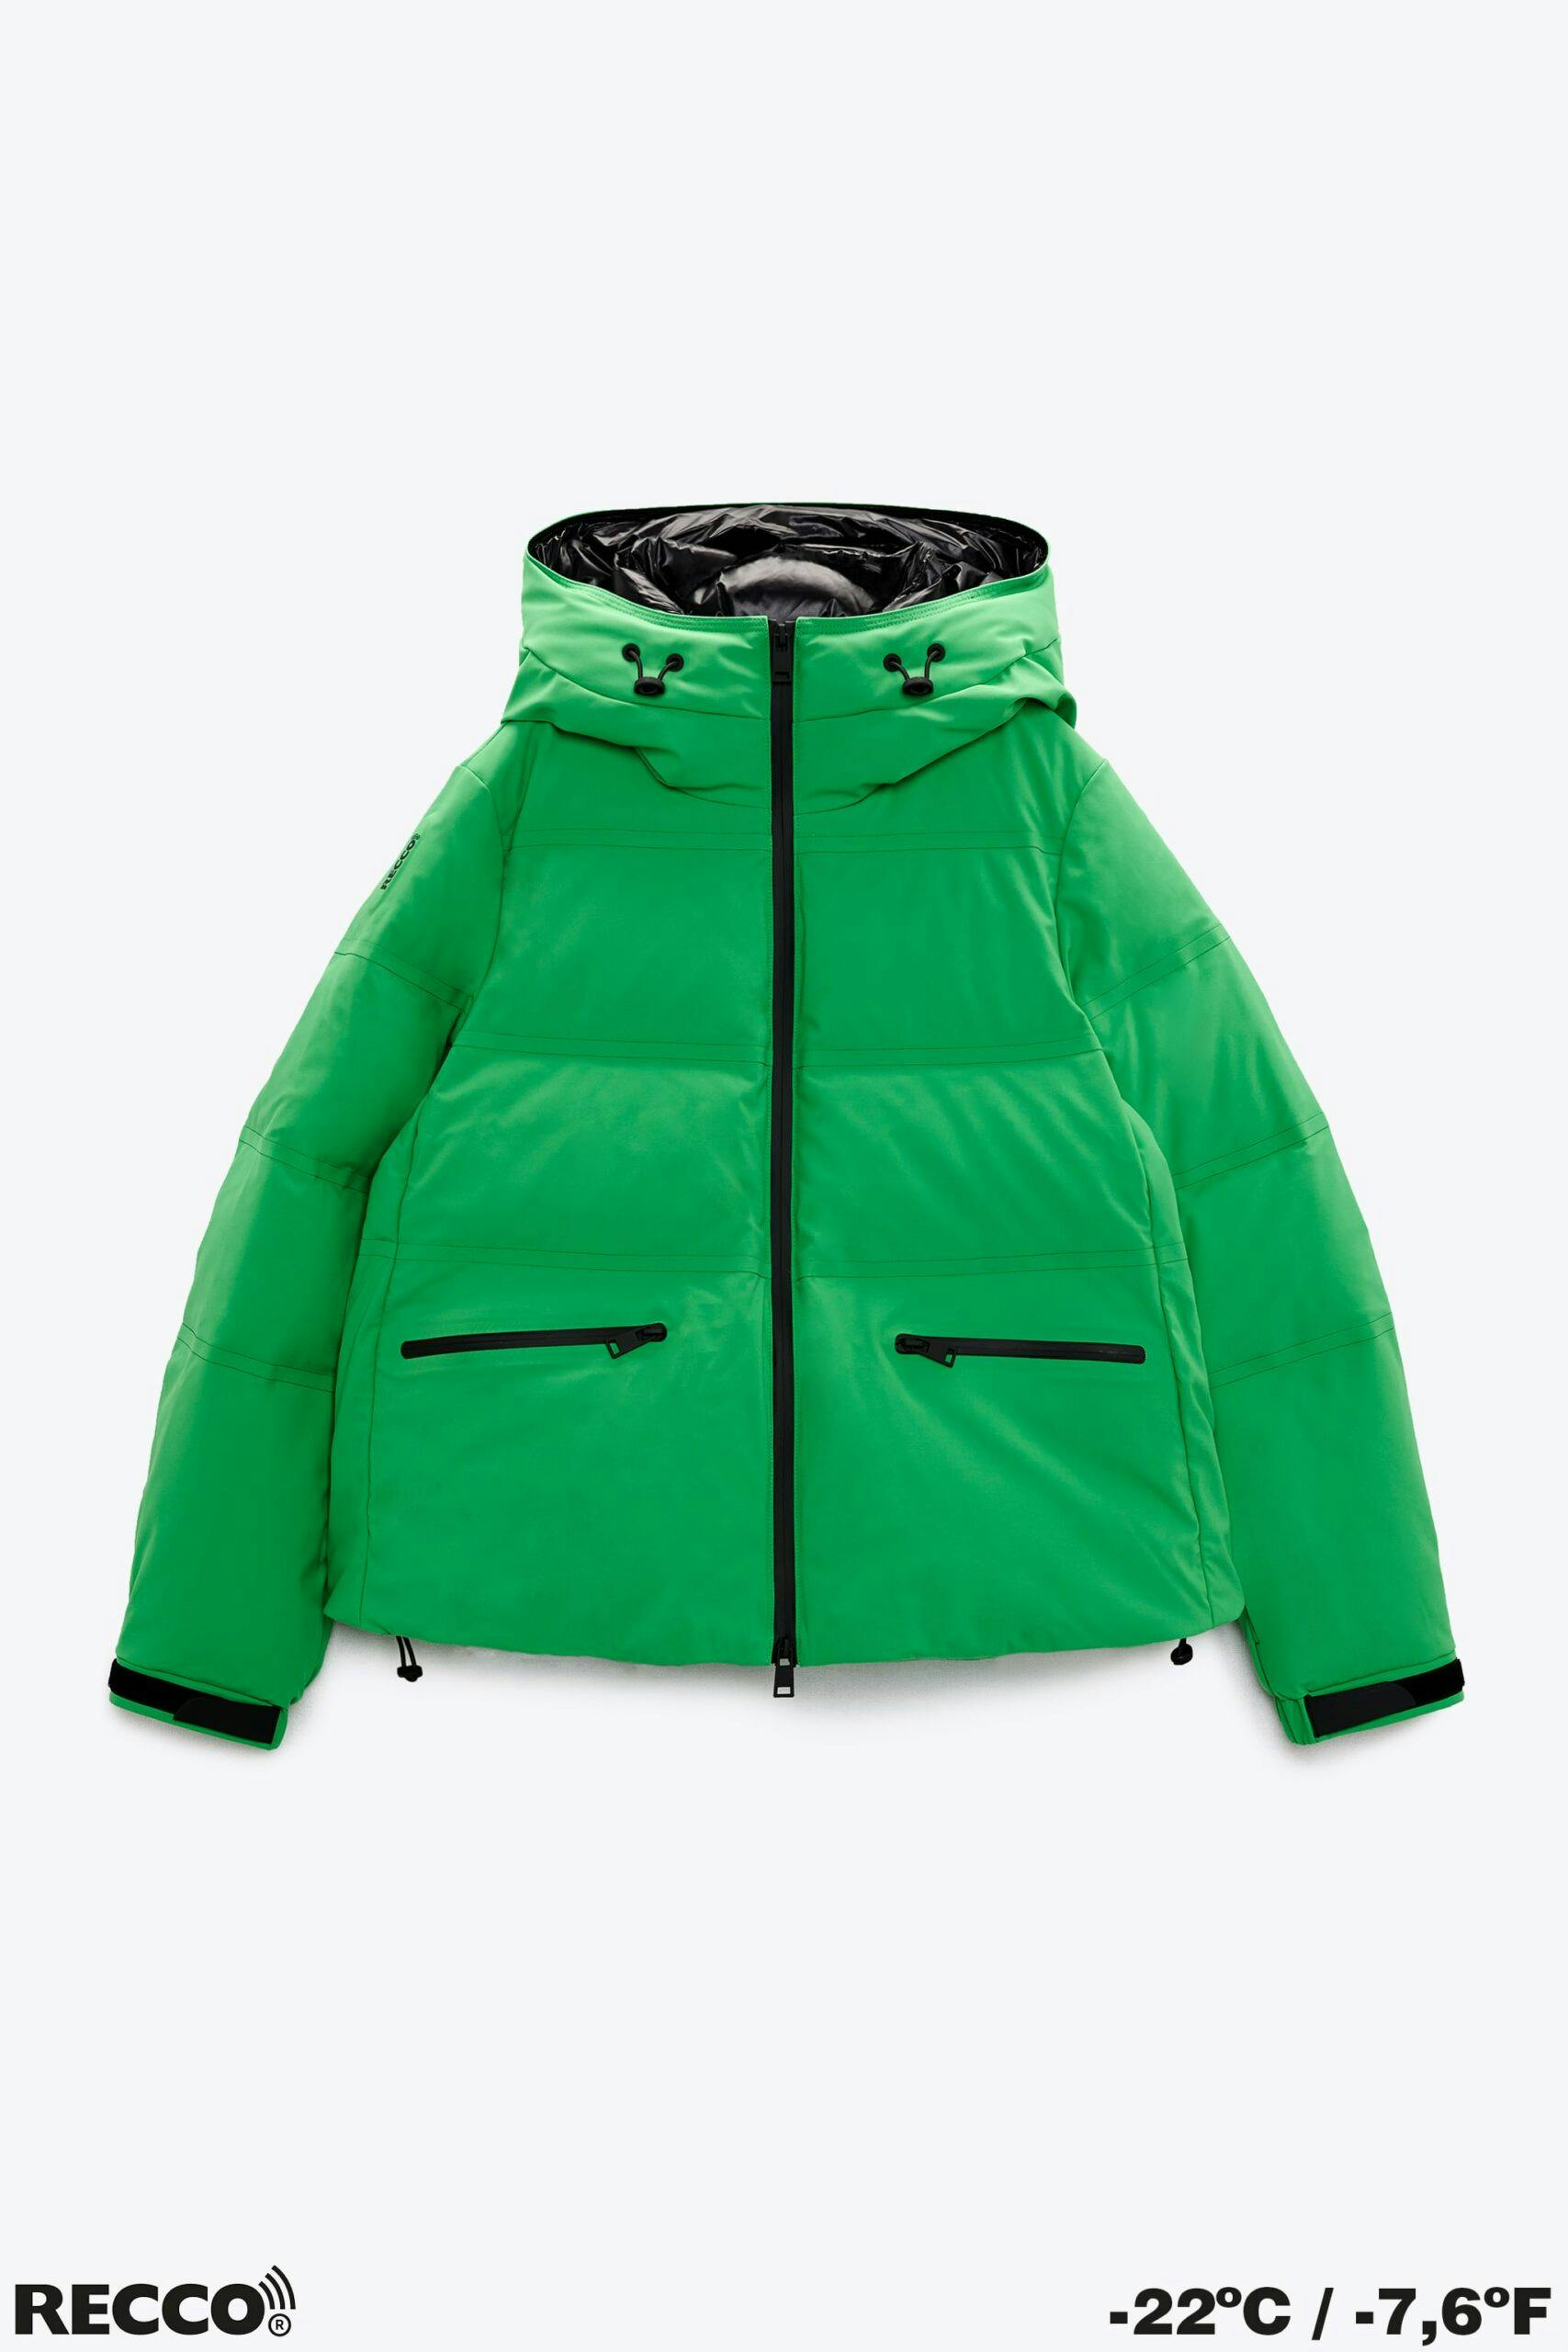 Zara's 2023 Skiwear Collection Is Iconic And Currently On Sale ...